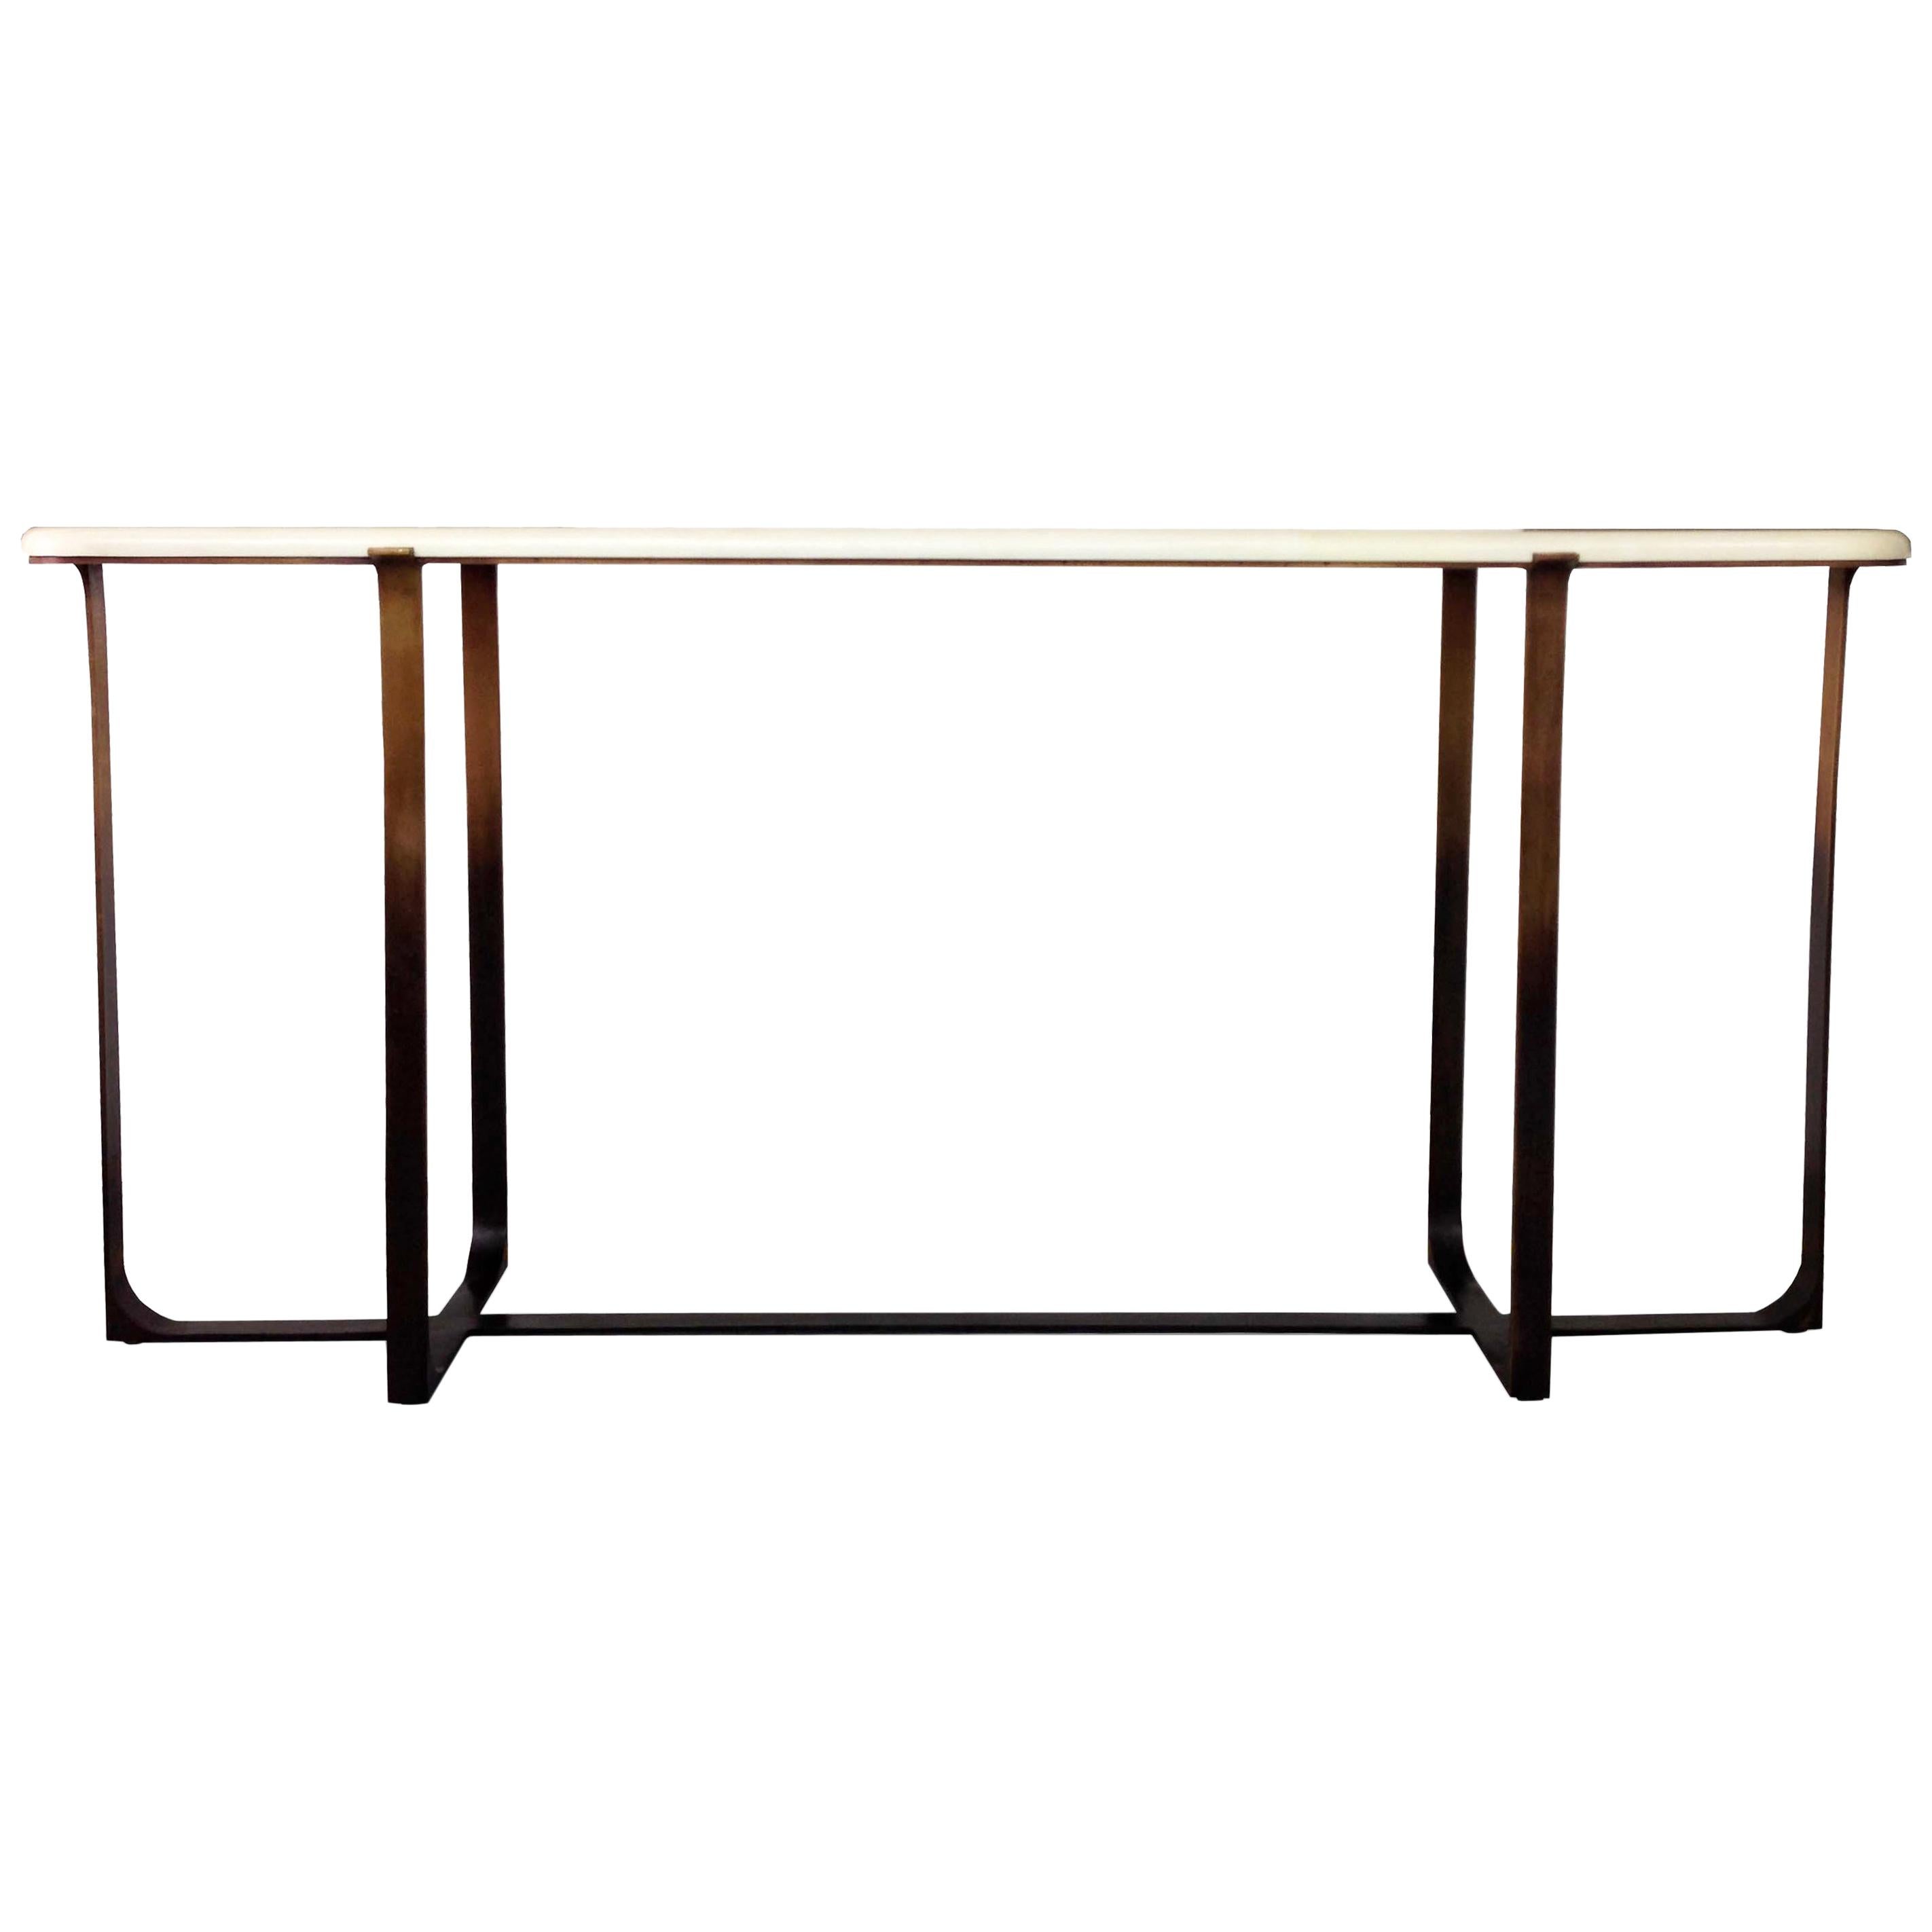 Parchment Top Console Table with Bronze Ombre Finish Base by Elan Atelier